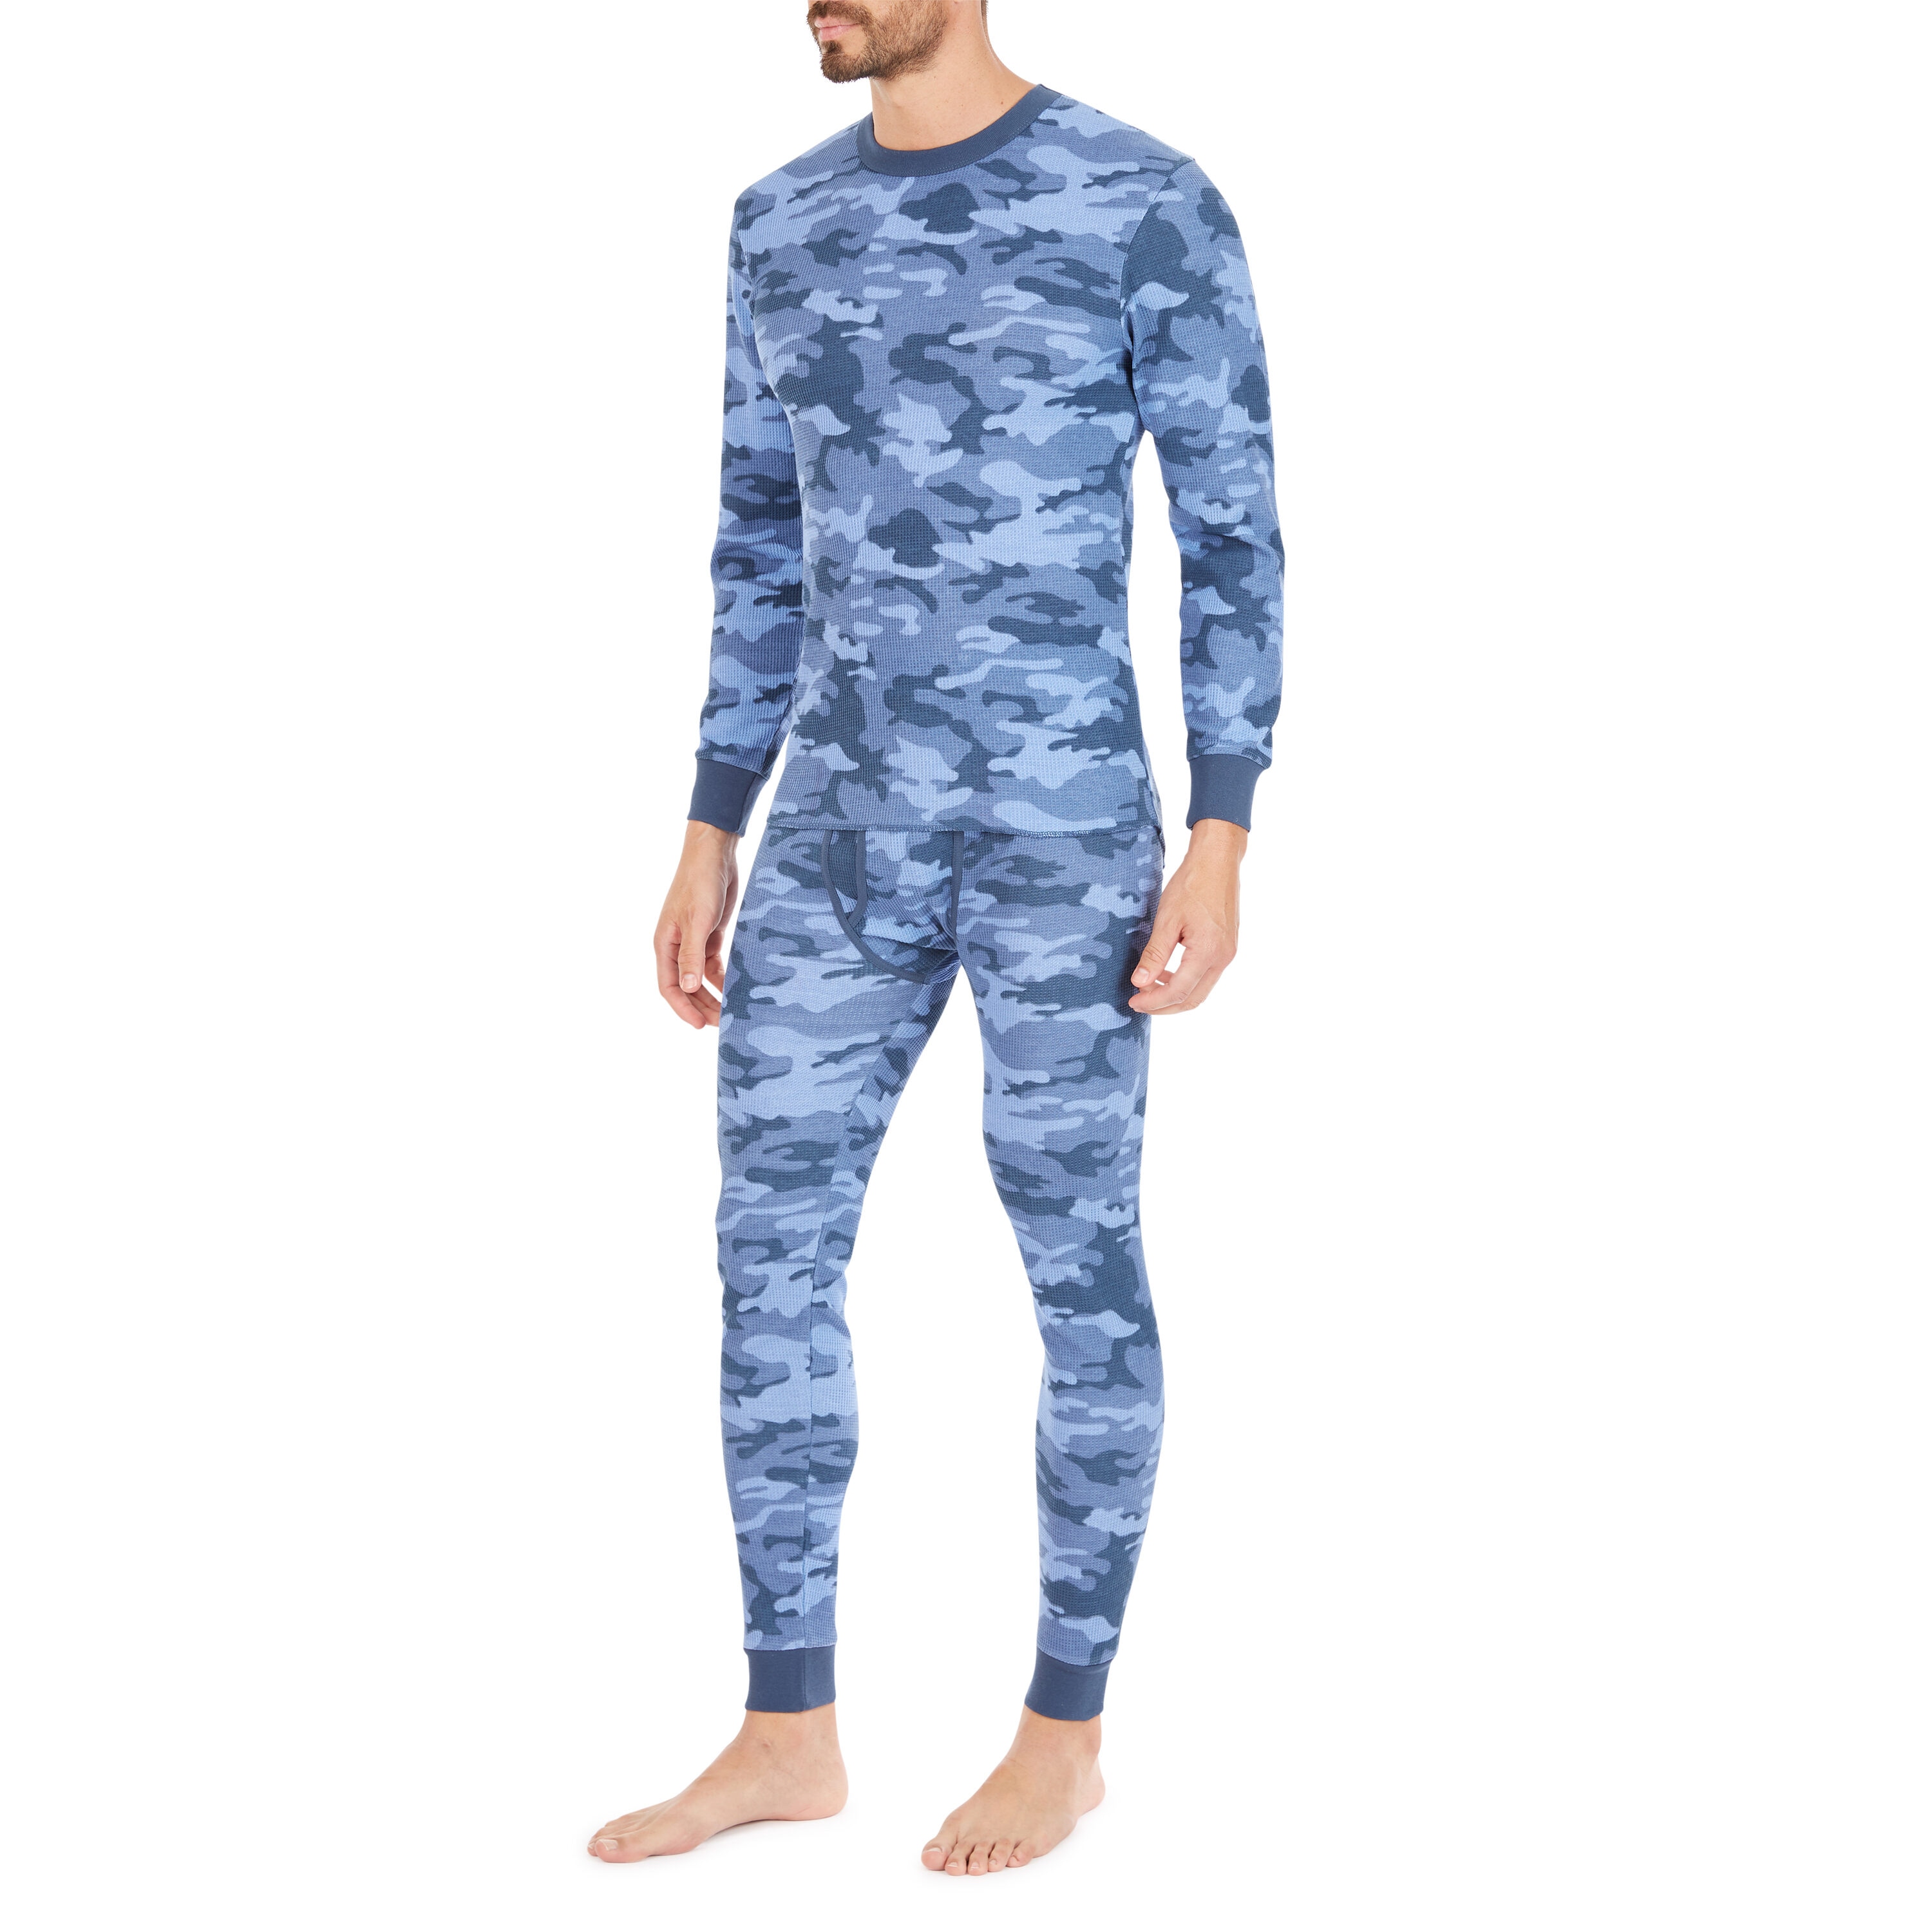 Smith's Workwear Denim Camo-199g Cotton/Polyester Thermal Base